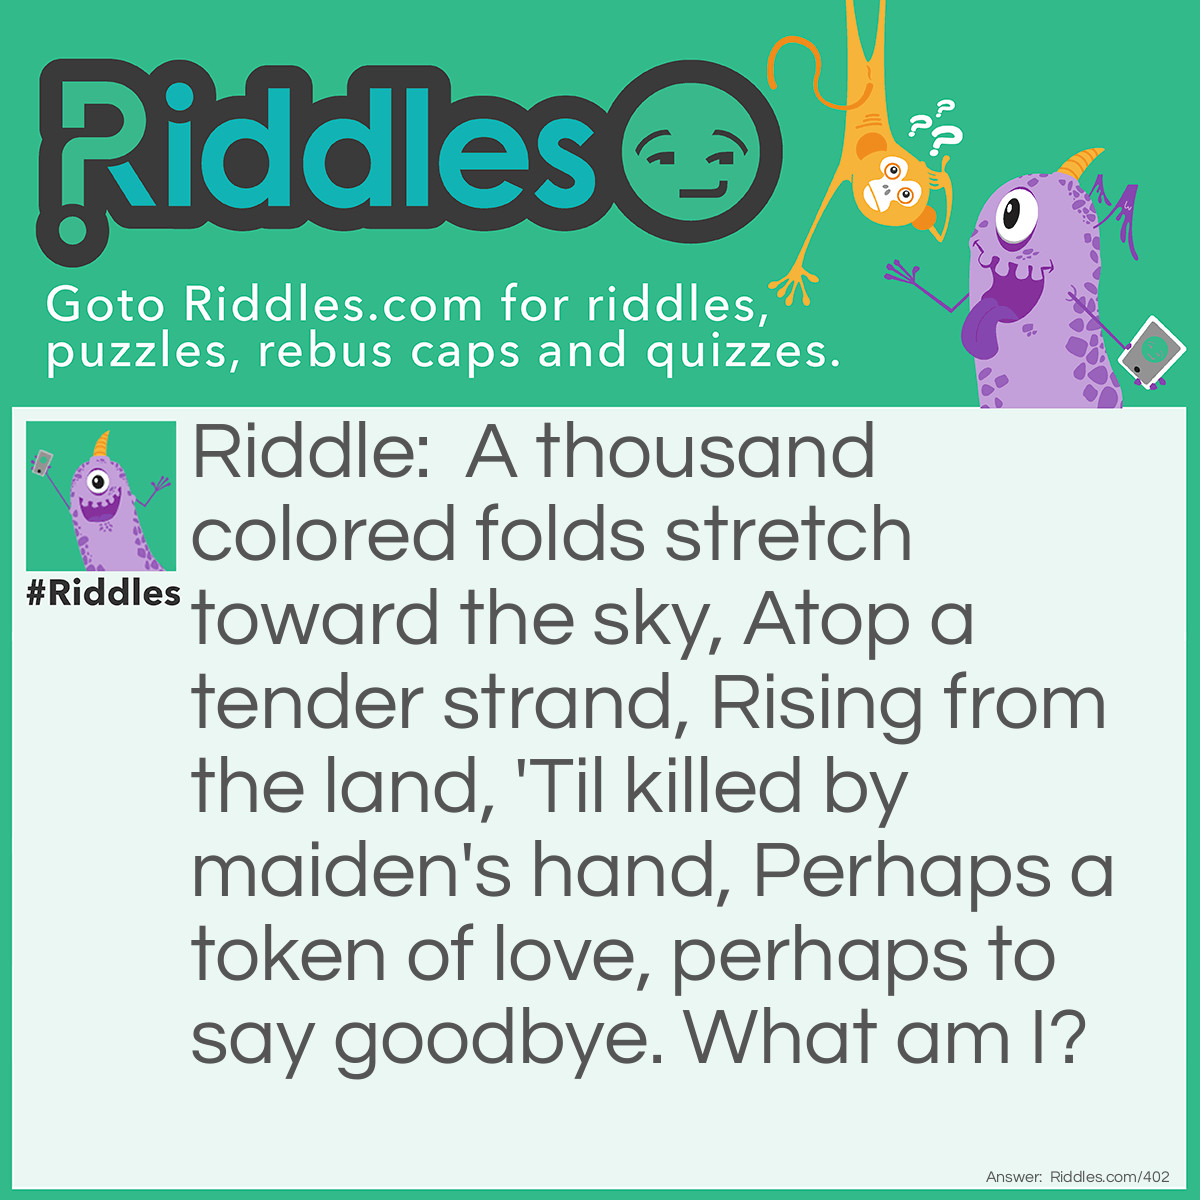 Riddle: A thousand colored folds stretch toward the sky, Atop a tender strand, Rising from the land, 'Til killed by maiden's hand, Perhaps a token of love, perhaps to say goodbye. What am I? Answer: A flower.